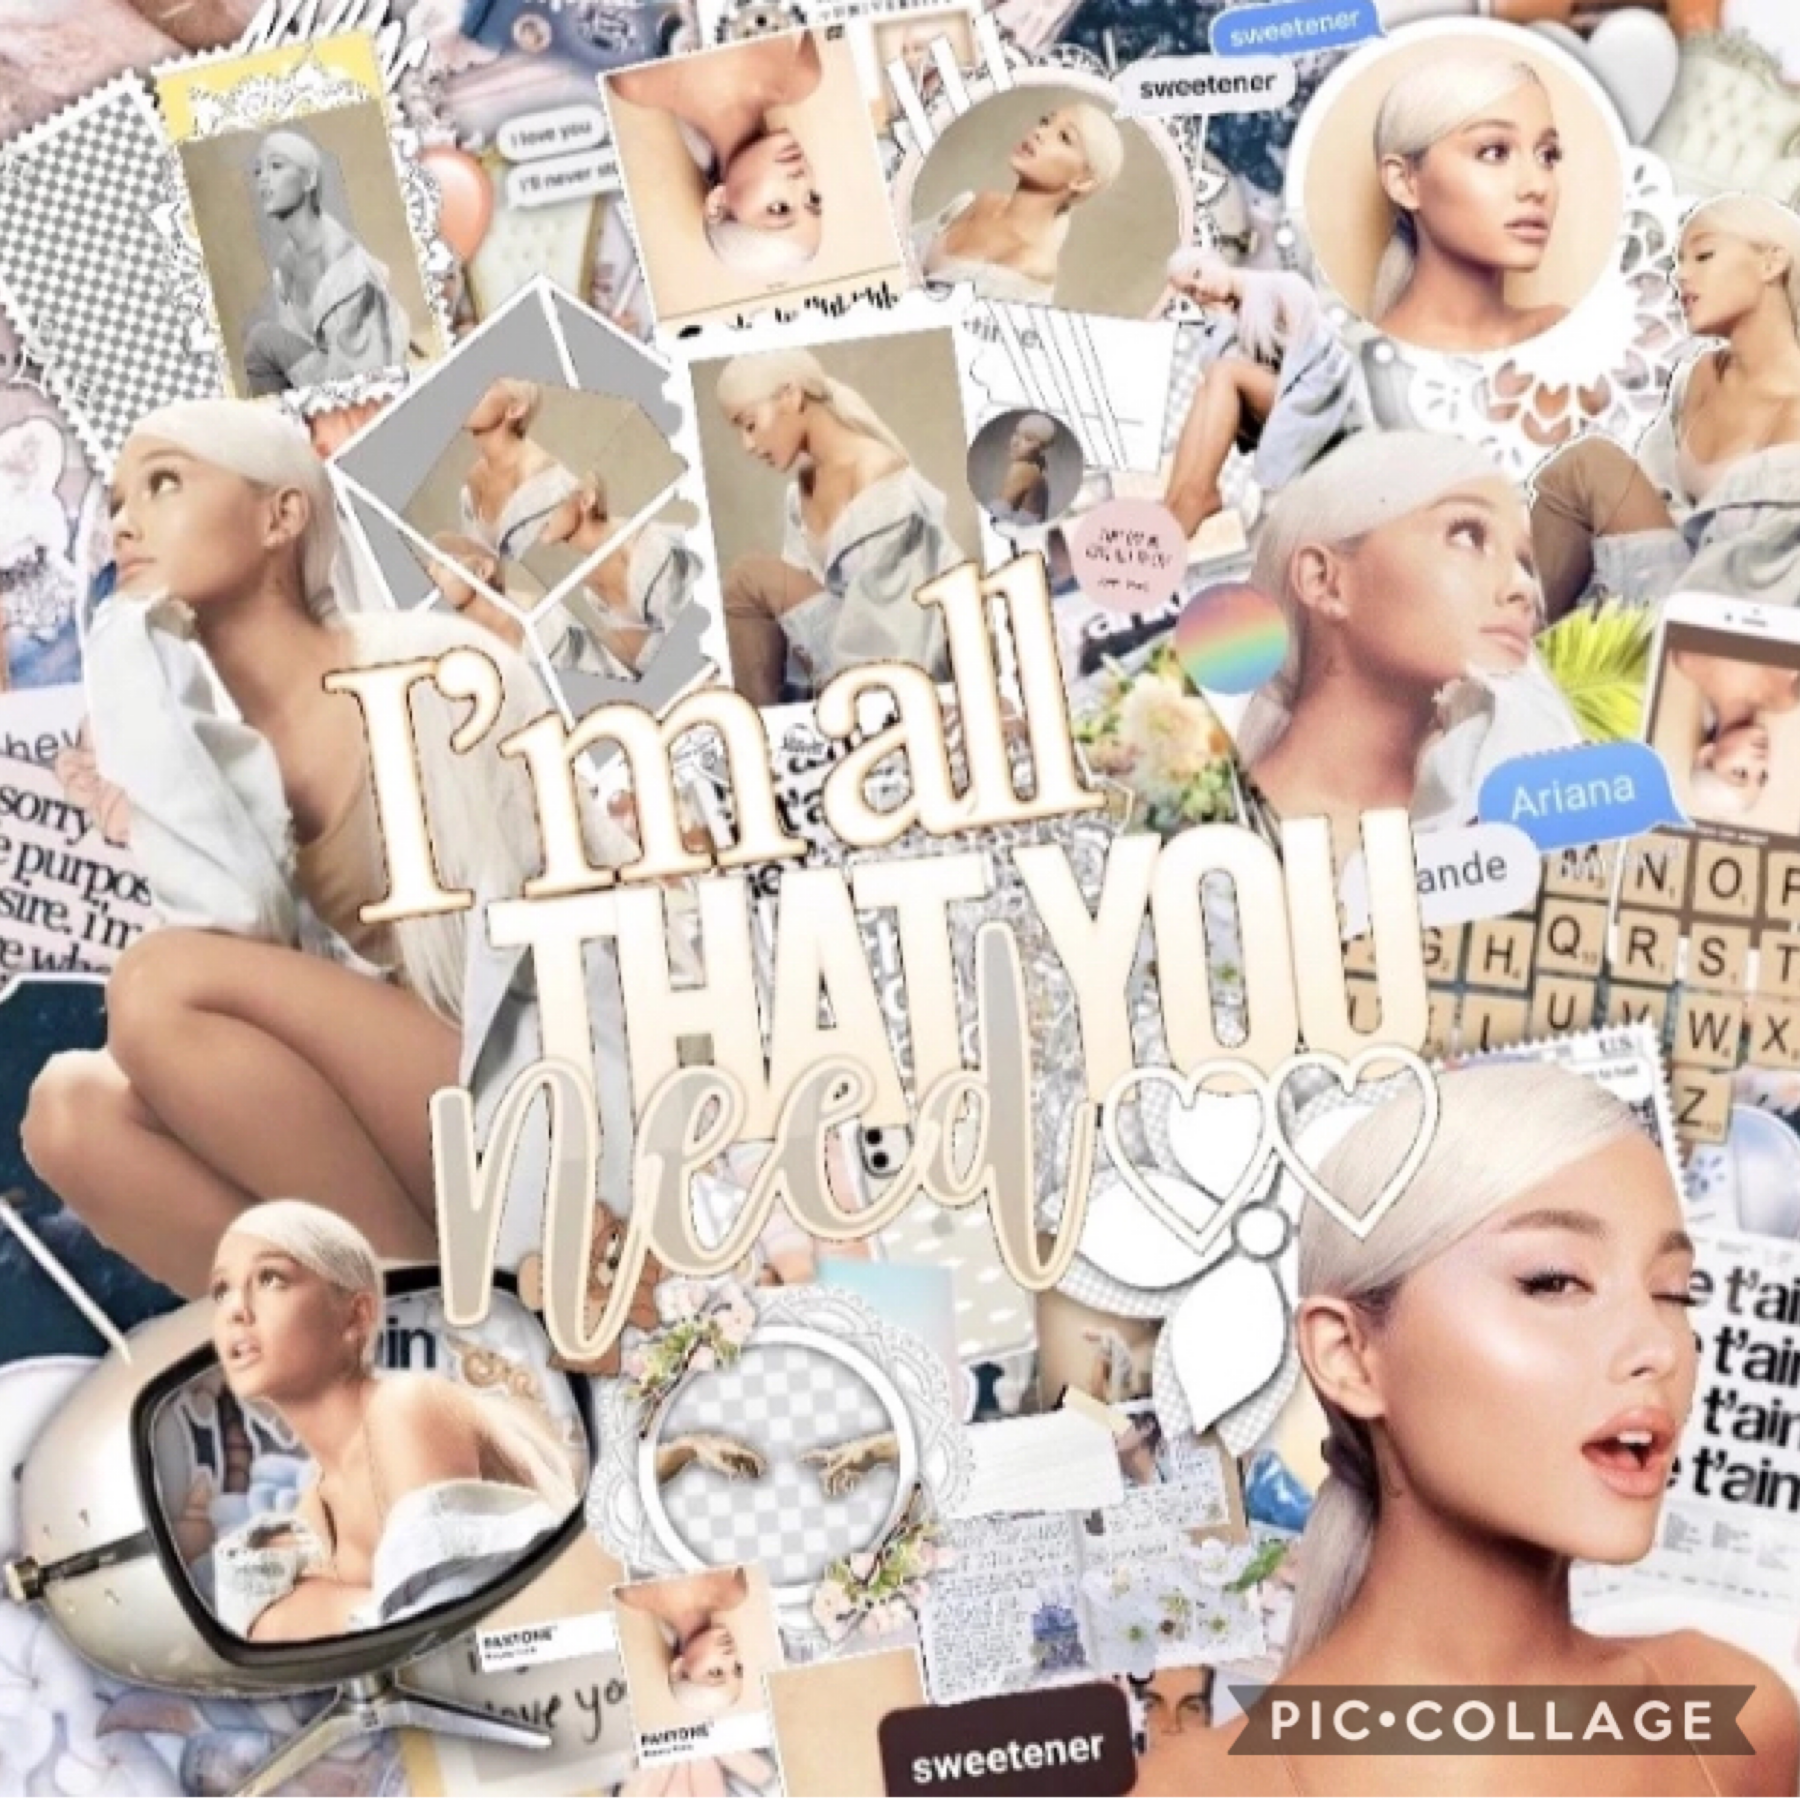 💖tap💖

Another sw edit ! Please like and comment 💖